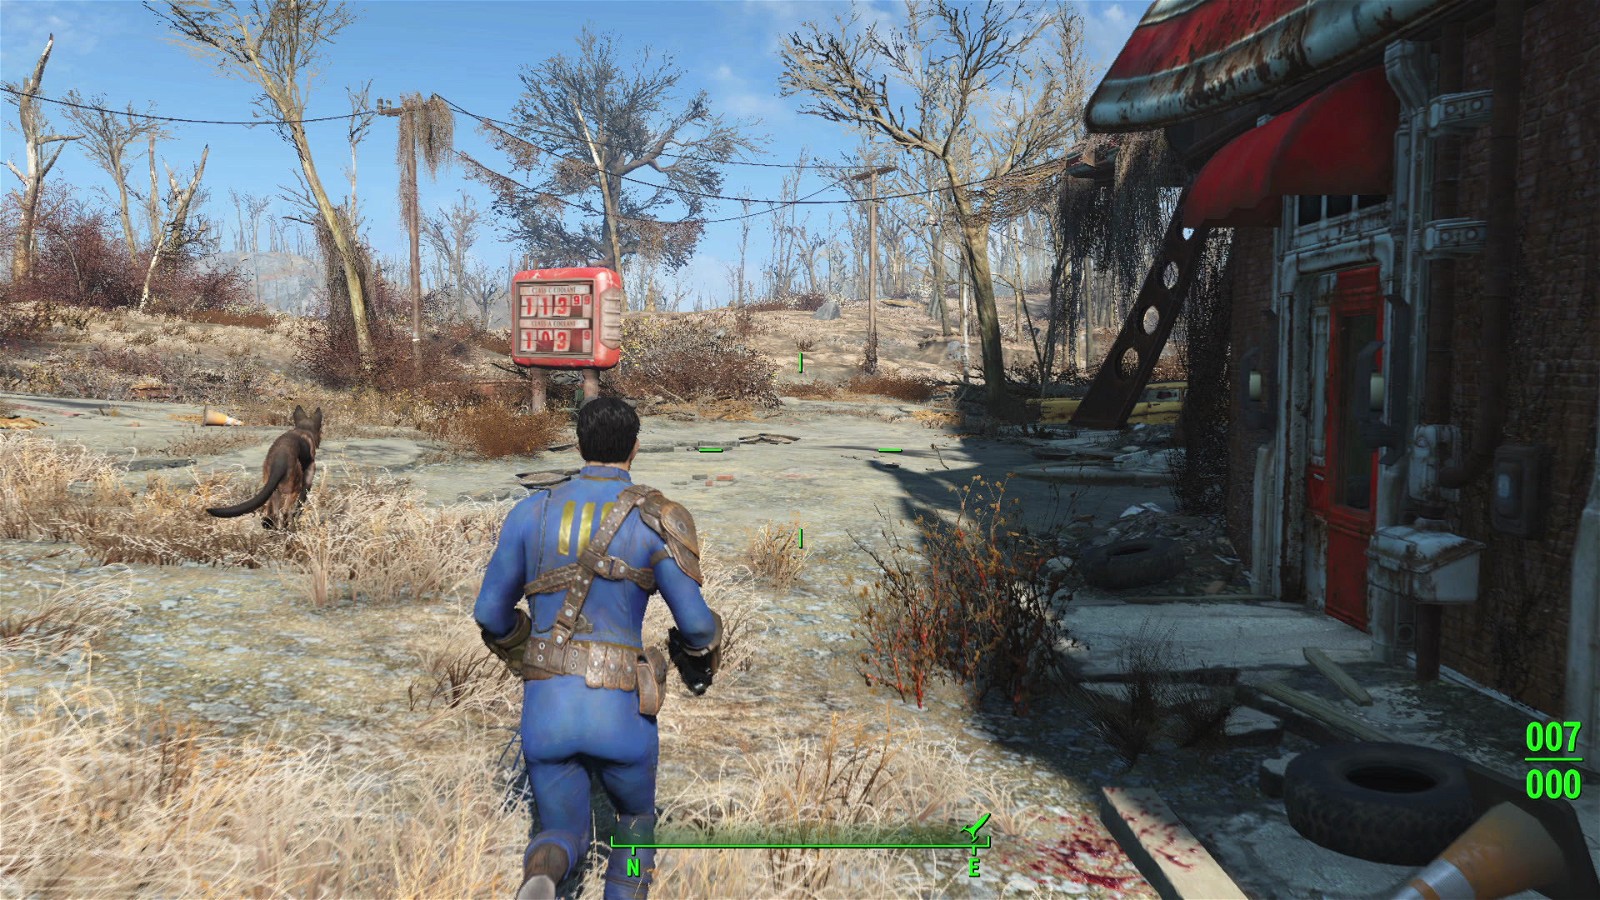 Todd Howard expressed his feelings regarding the series and how he wanted to make some changes with Fallout 4